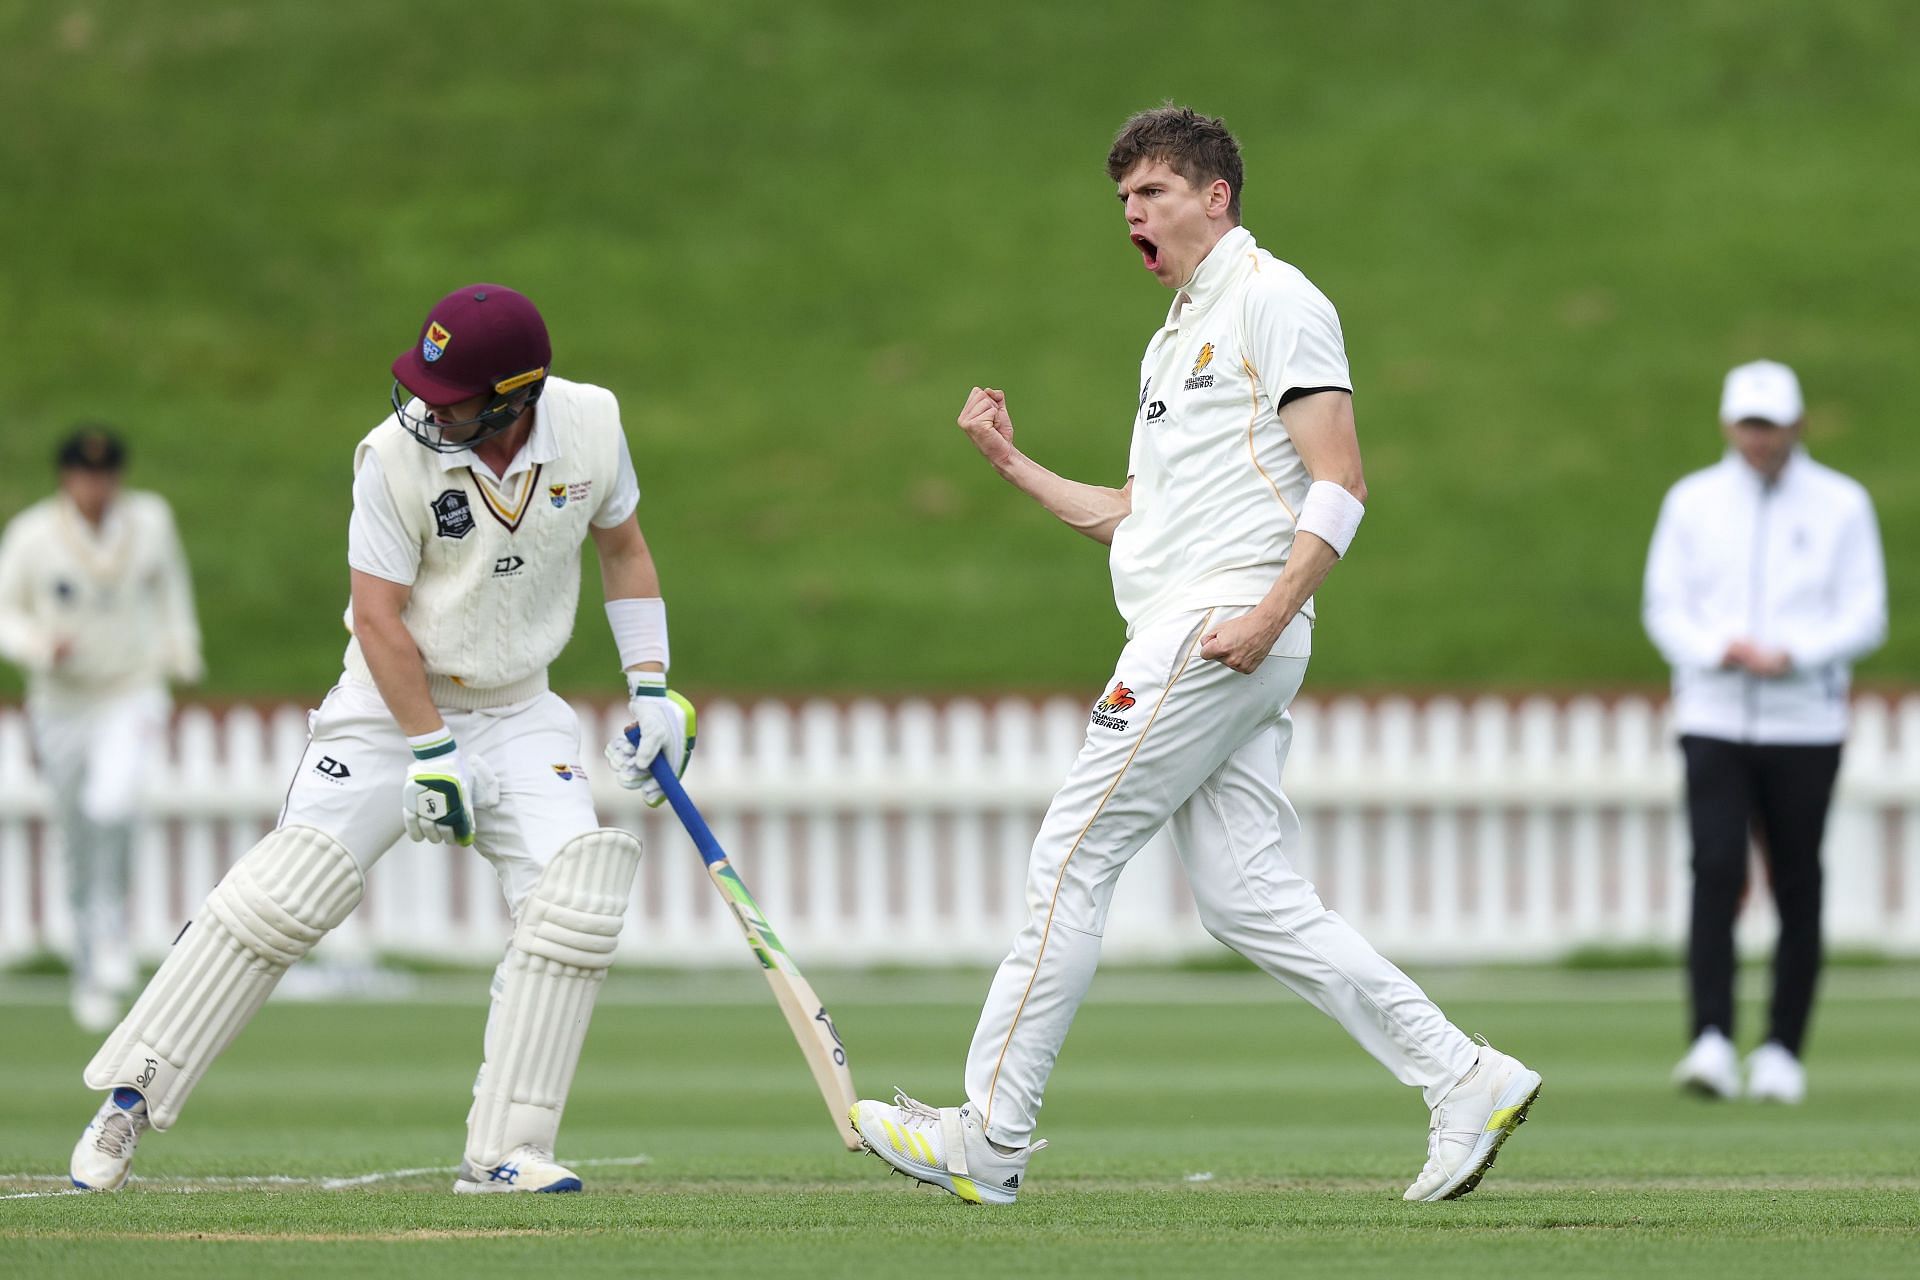 Plunket Shield - Wellington v Northern Districts: Day 2